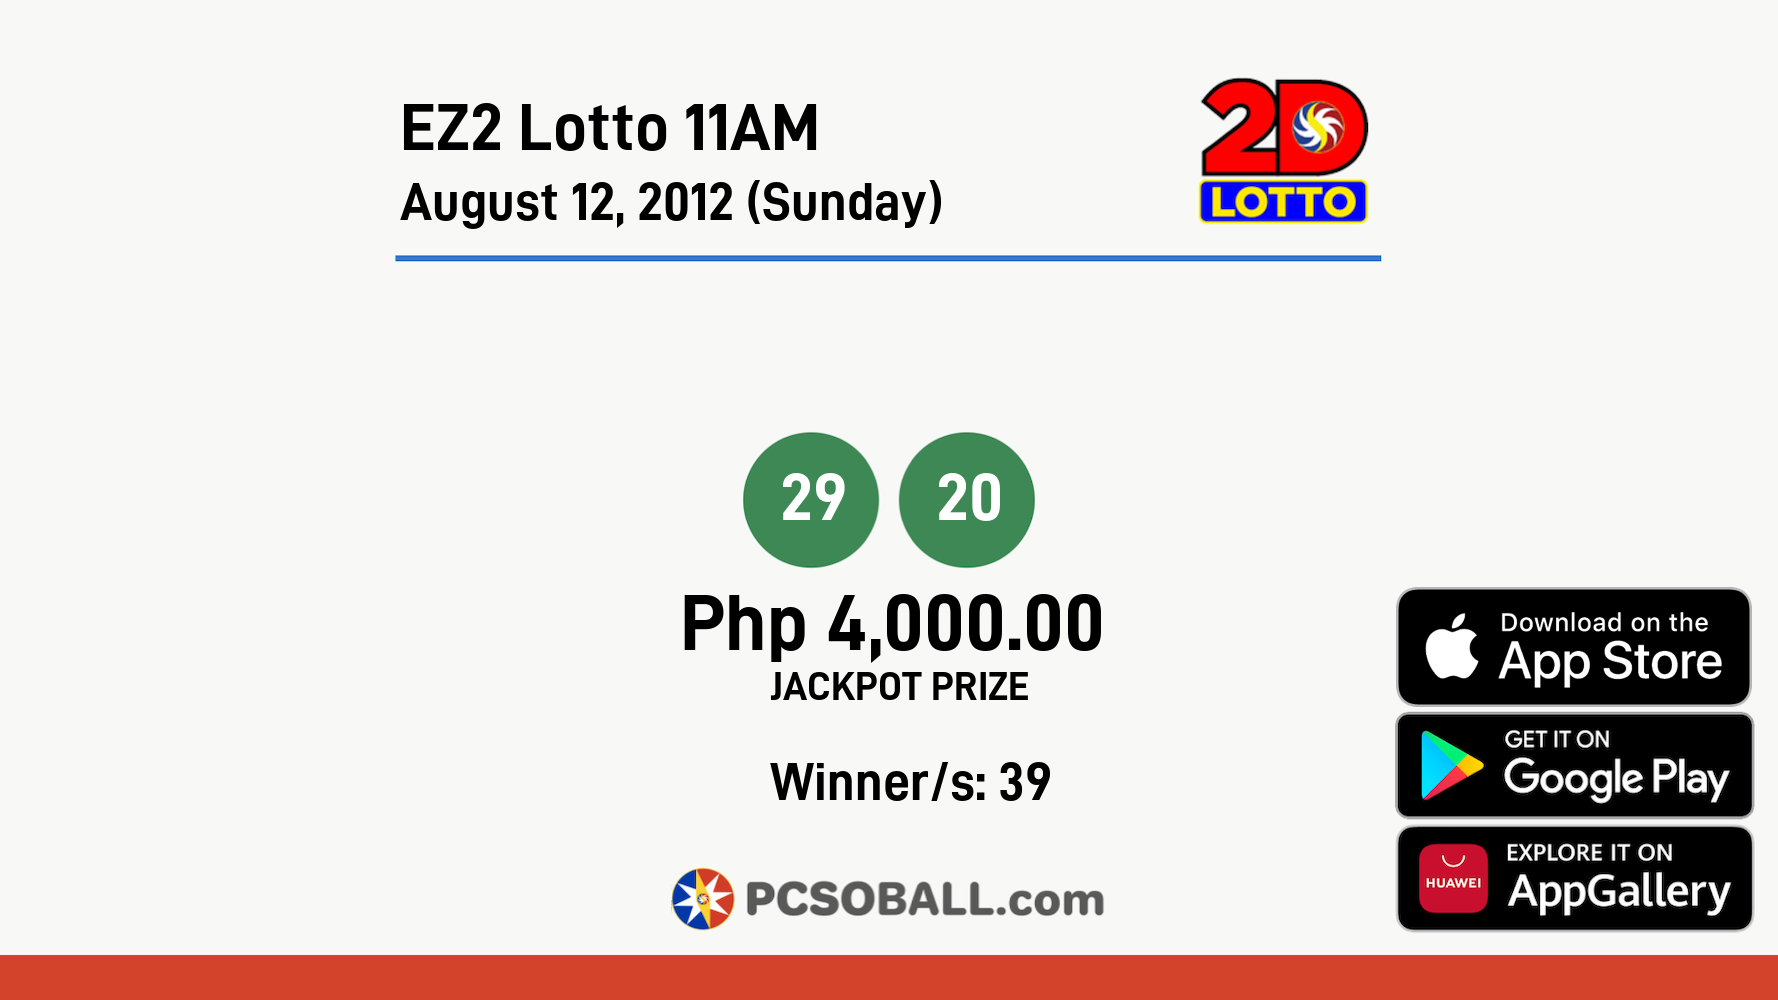 EZ2 Lotto 11AM August 12, 2012 (Sunday) Result